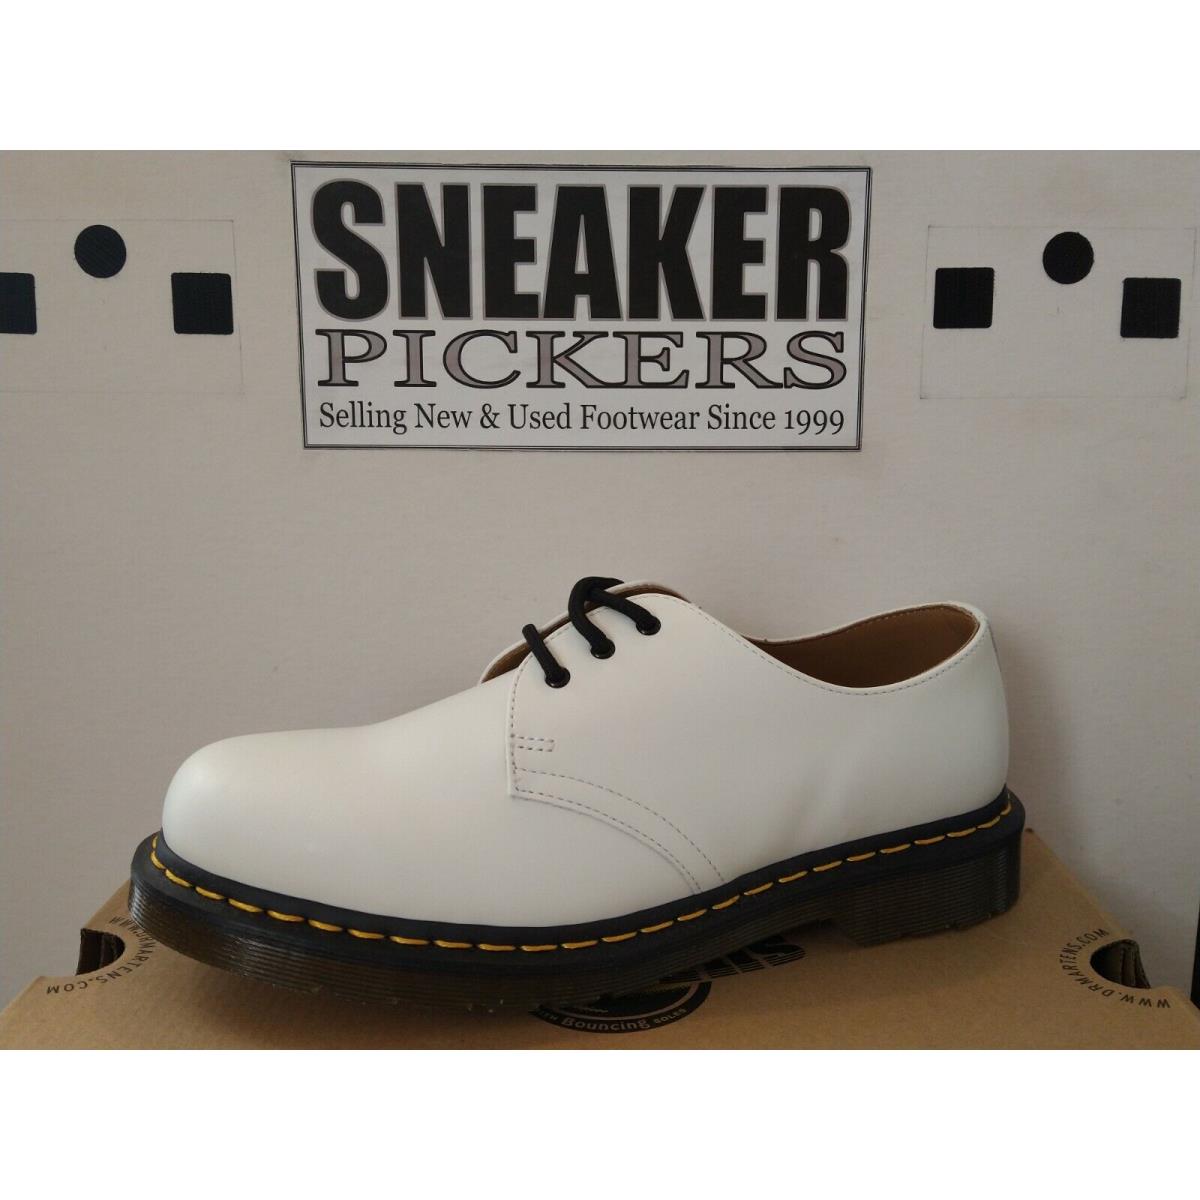 Dr. Martens 1461 Smooth Leather Oxford Shoe - 26226100 - White - Mens: 9